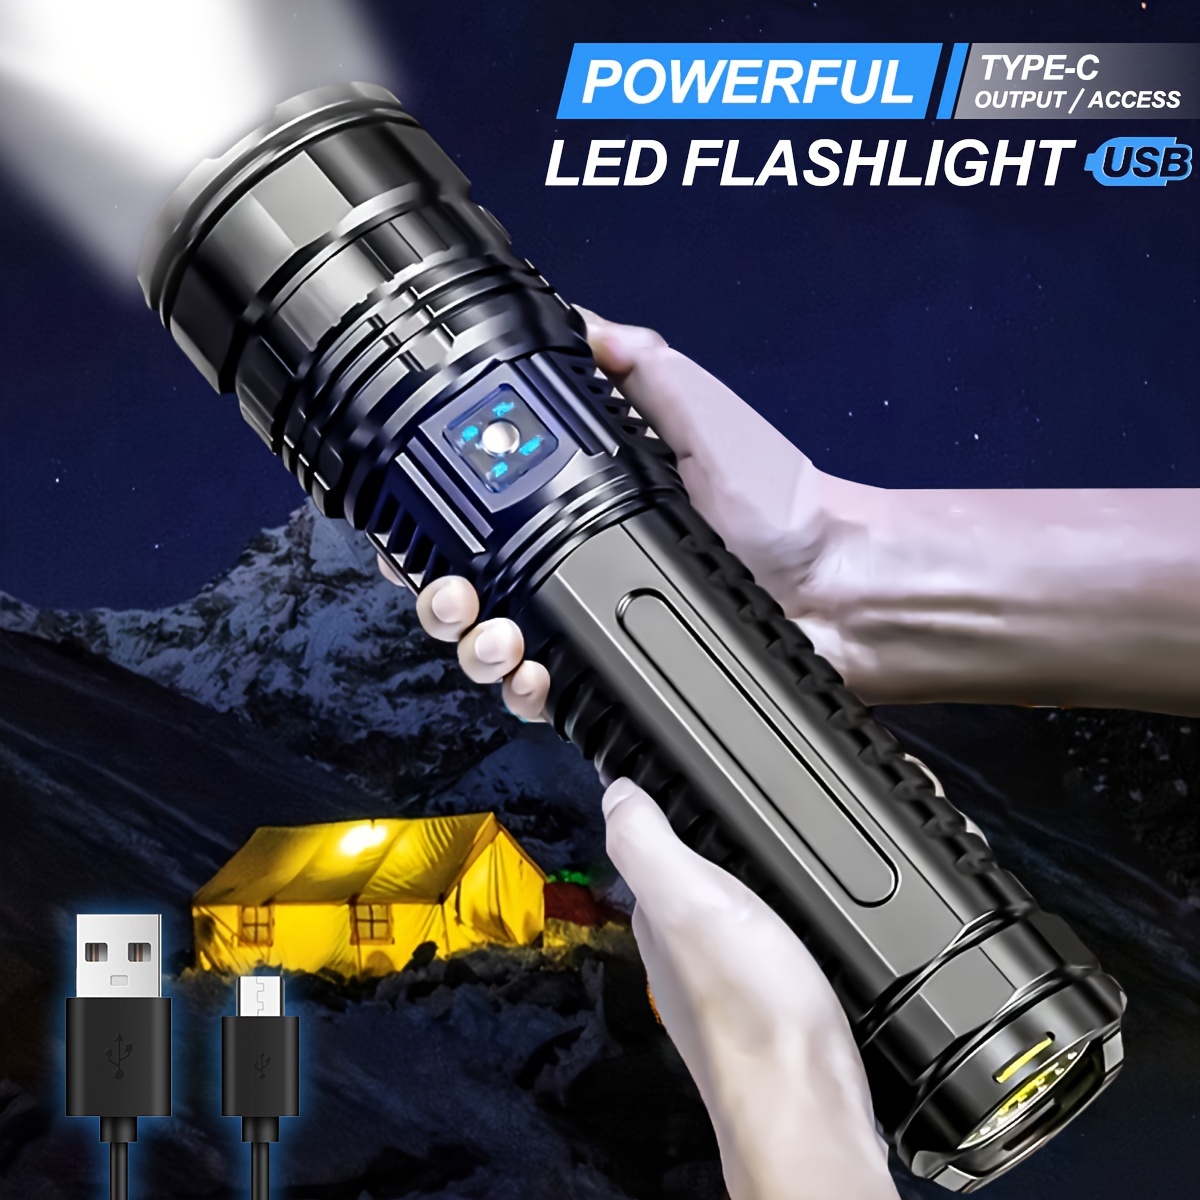 

Ultra-bright Large Flashlight, White Laser Strong Light Long-range Spotlight, With Cob Light, Multi-function Usb Charging Led Flashlight, Adjustable Focus, For Emergency And Tactical Use